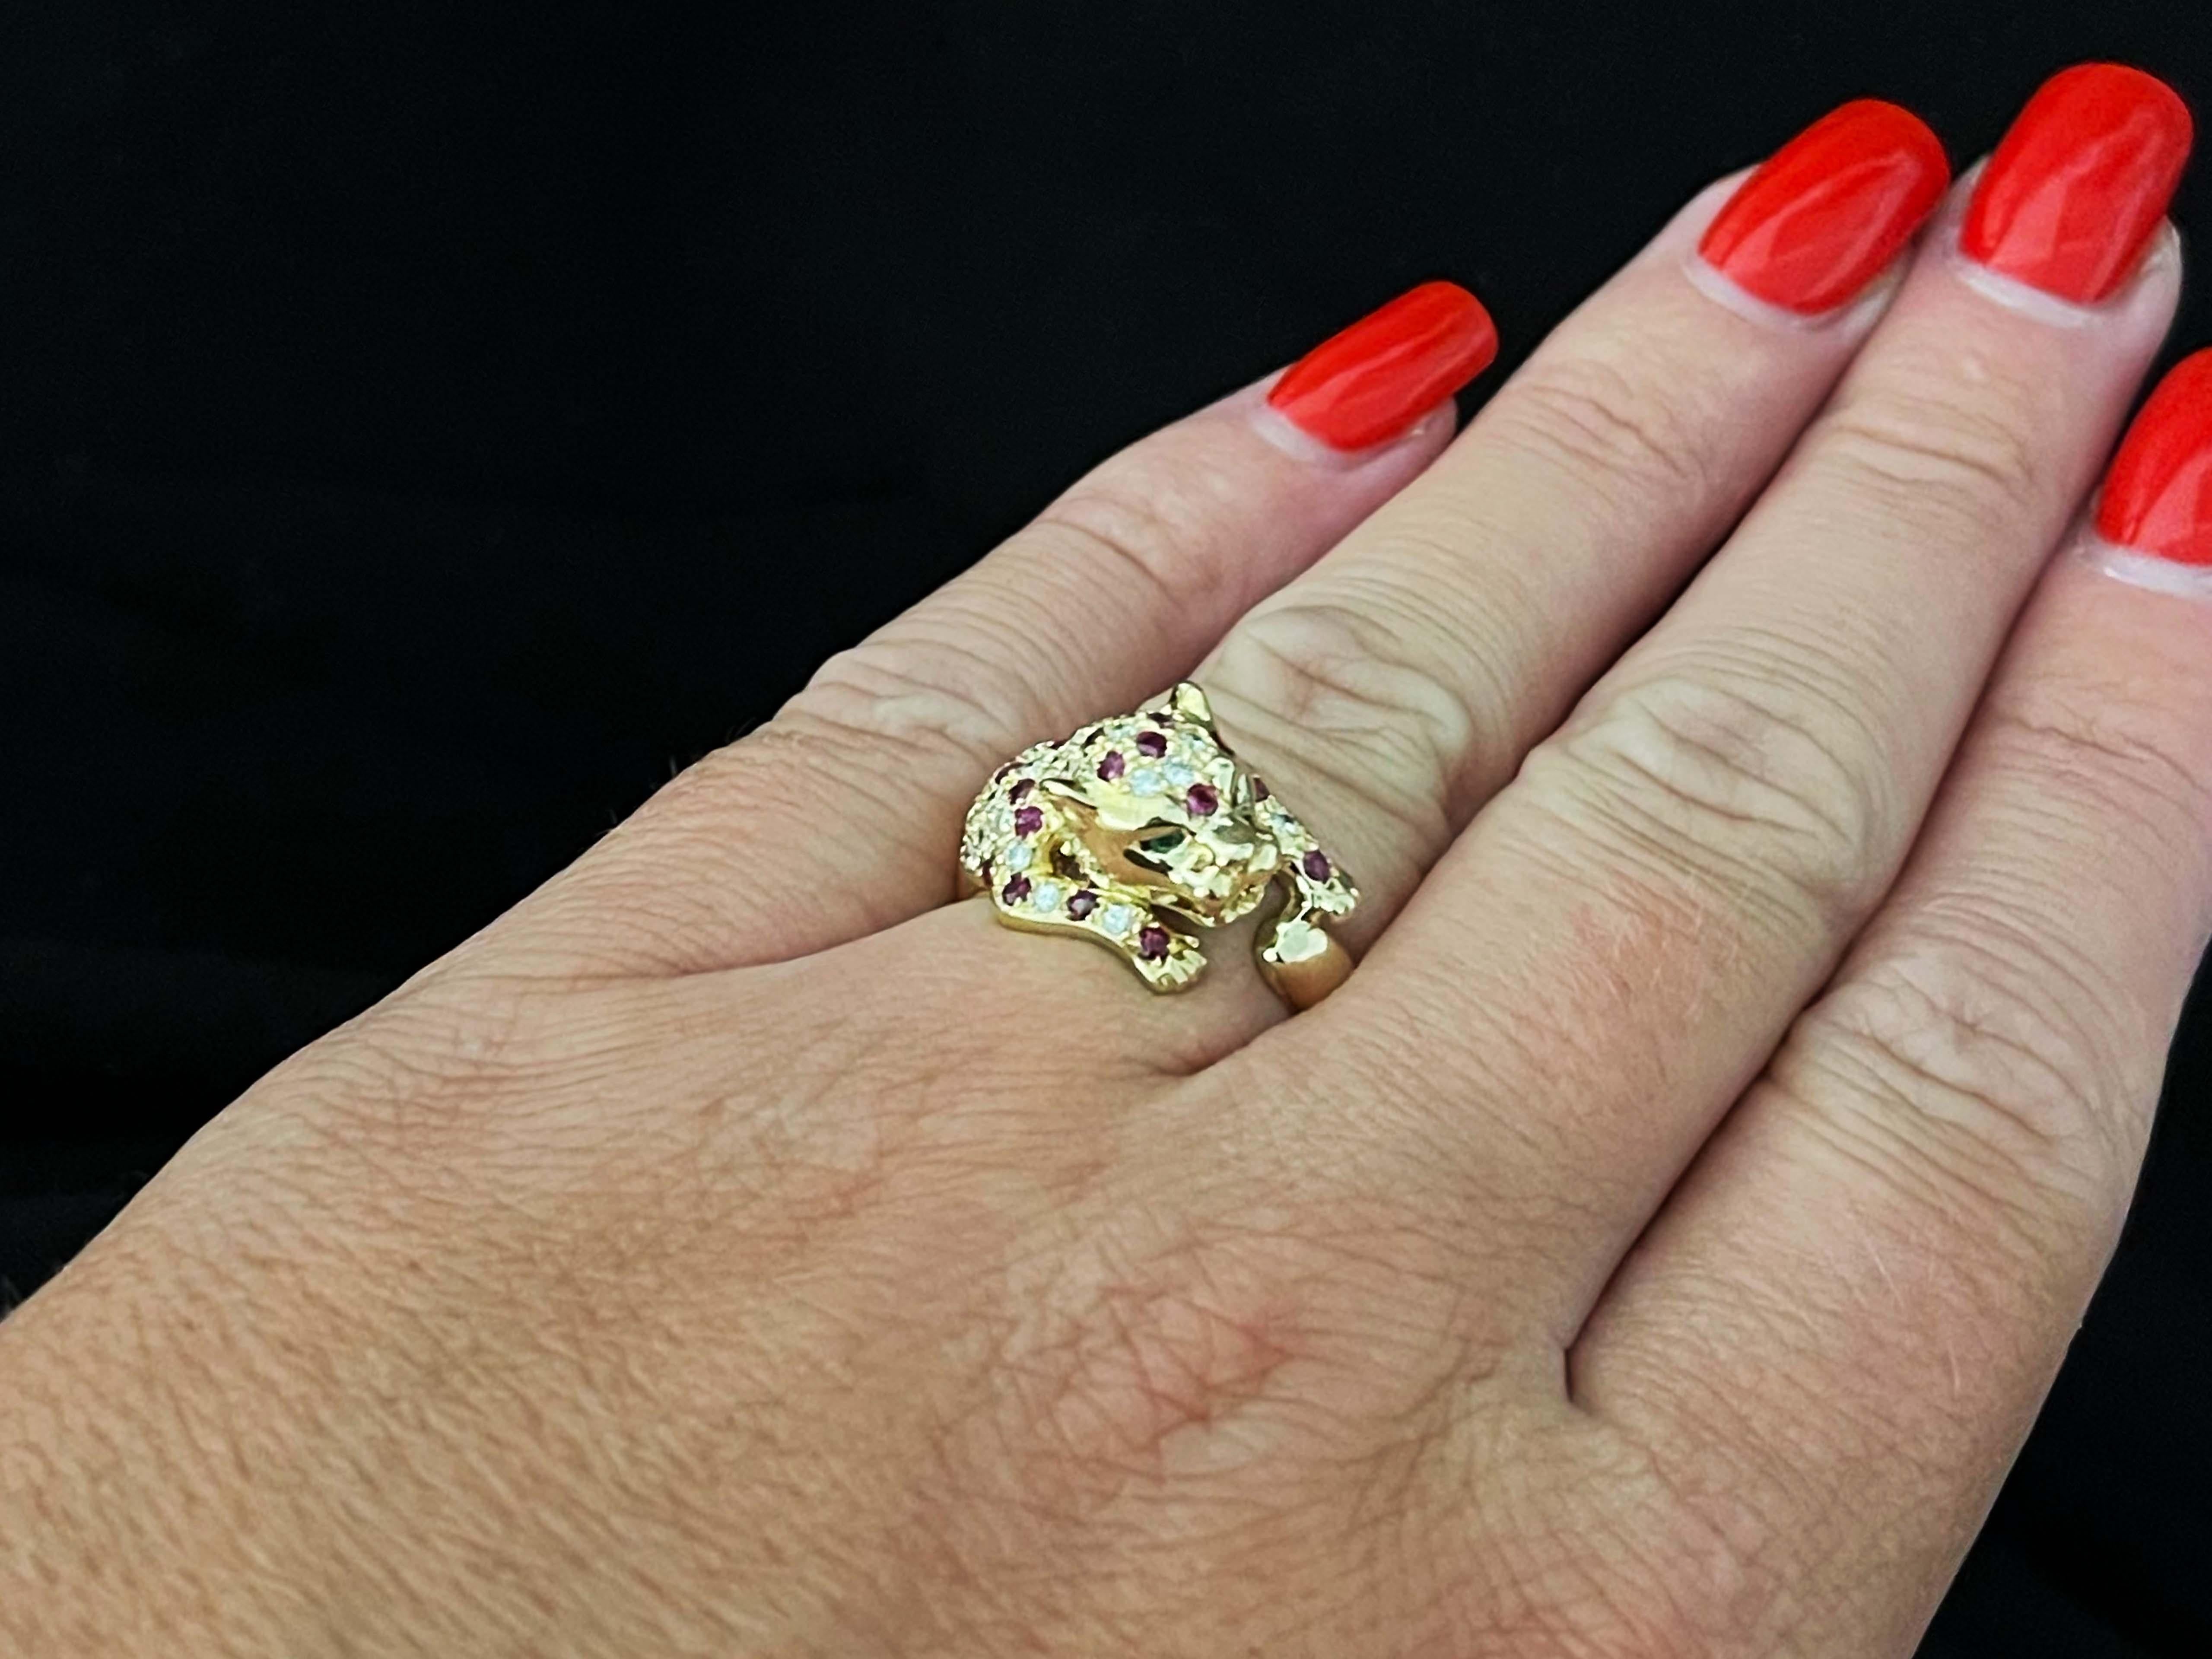 Item Specifications:

Metal: 14K Yellow Gold

Style: Statement Ring

Ring Size: 5.5 (resizing available for a fee)

Total Weight: 6.1 Grams

Emerald Carat Weight: ~0.02 carats

Ruby Carat Weight: ~0.50 carats

Diamond Carat Weight: ~0.35